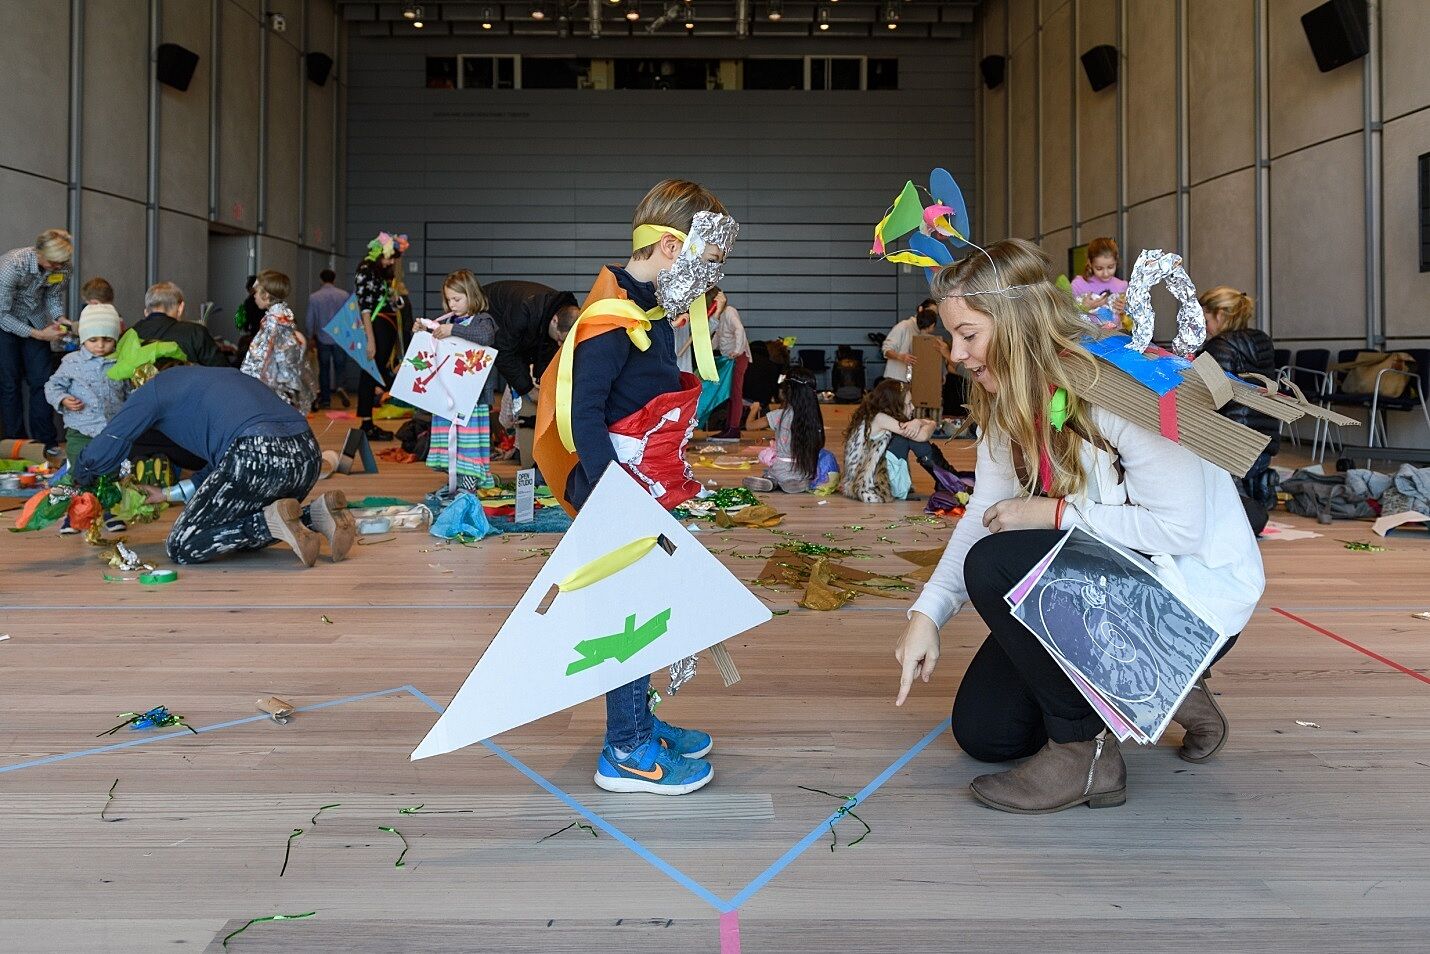 Kids made costumes during an Open Studios event